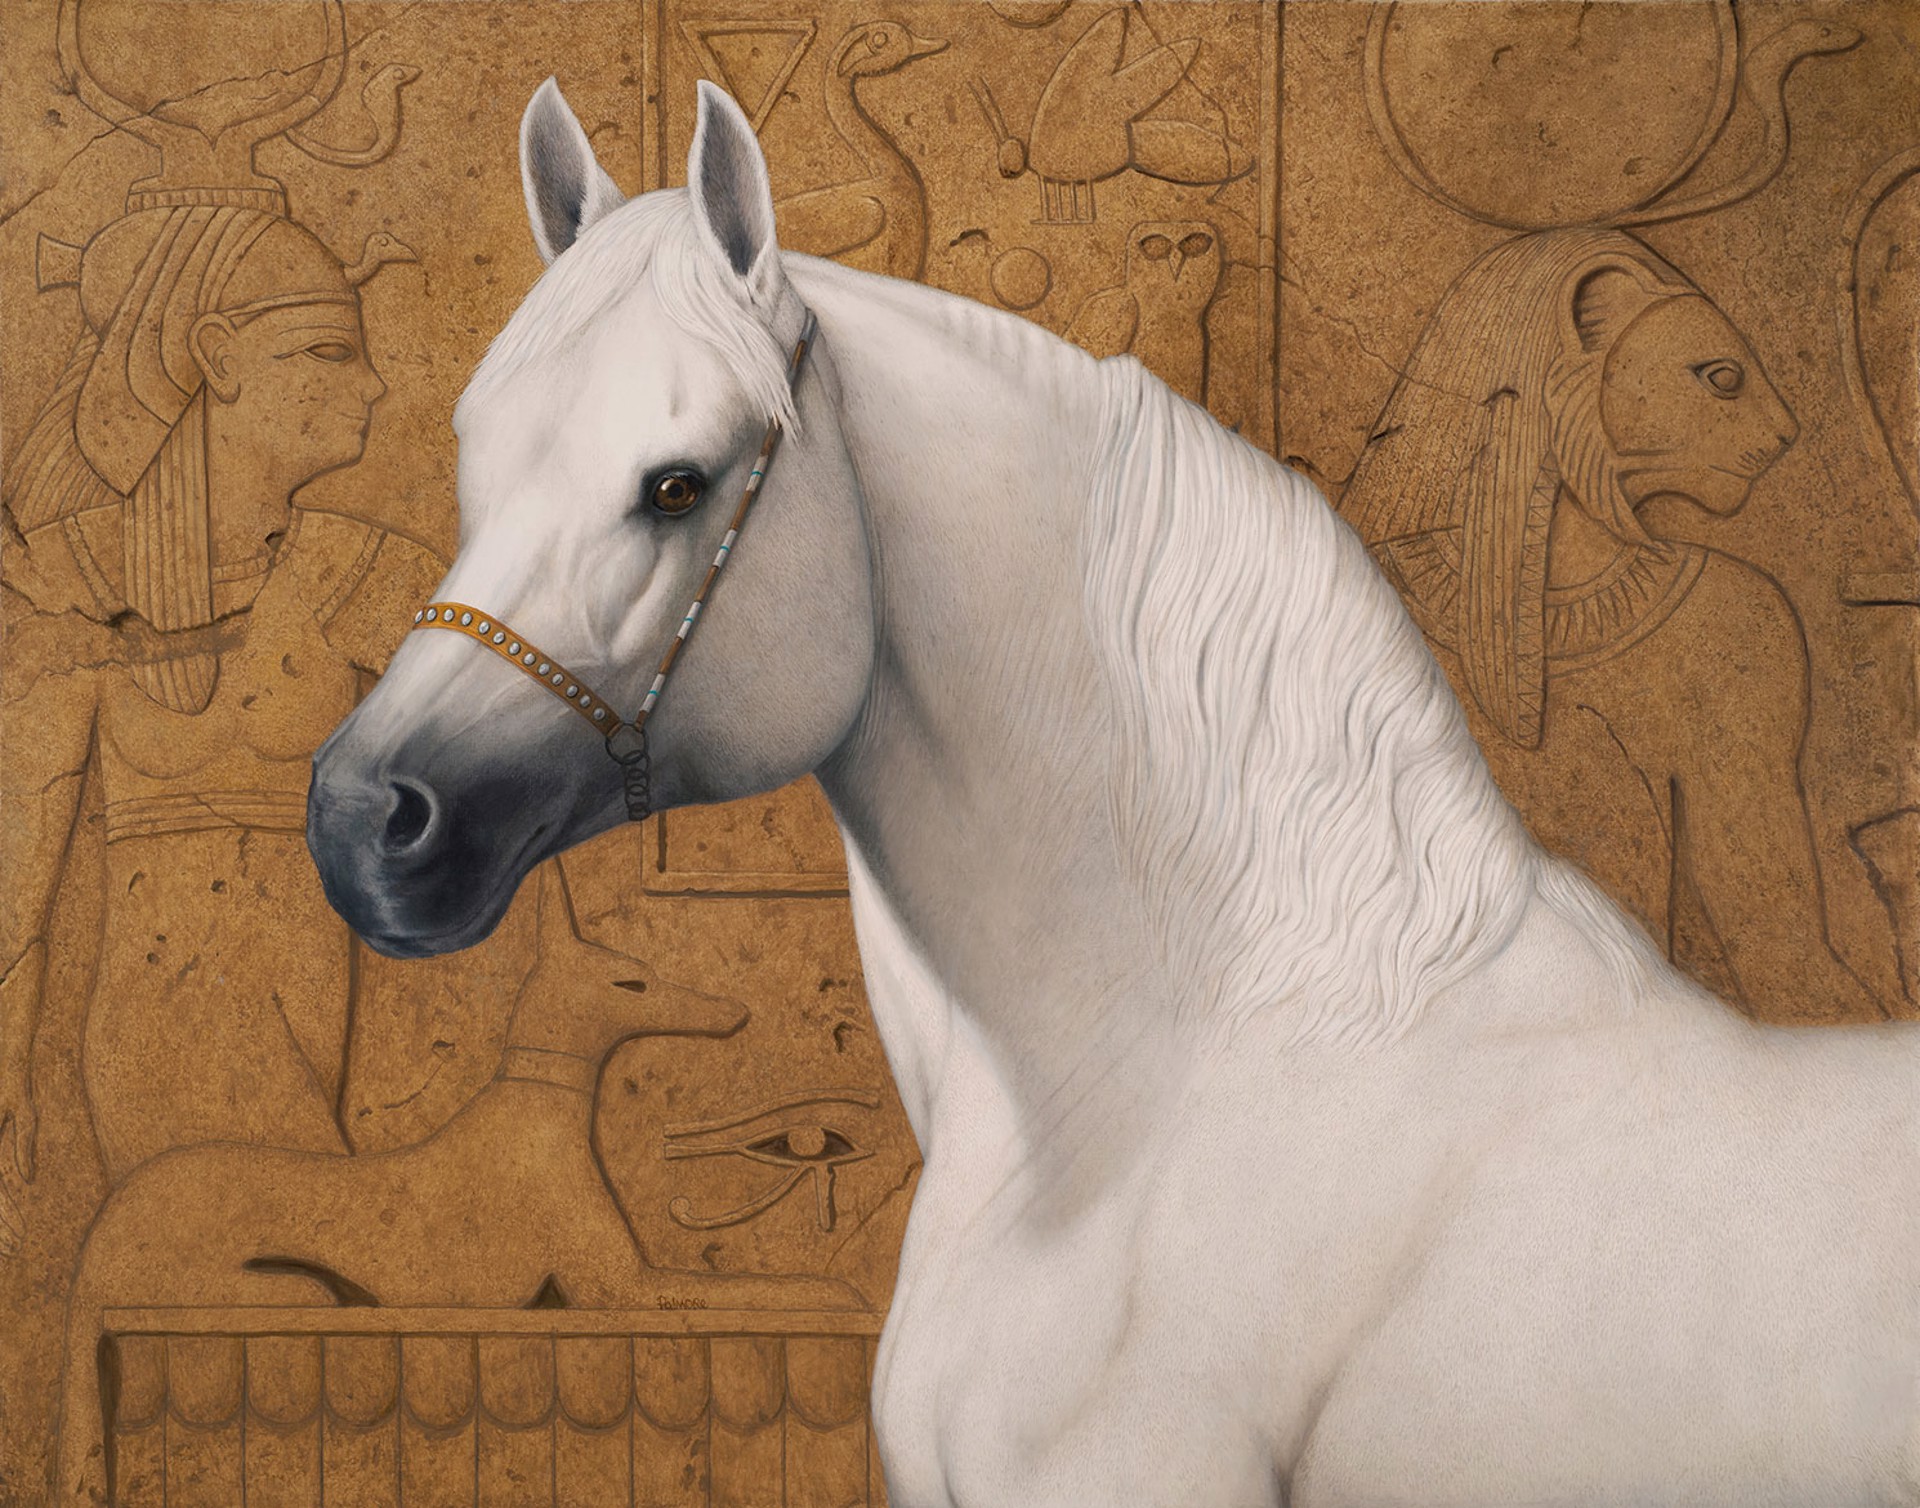 Cleopatra's Favorite Horse by Tom Palmore